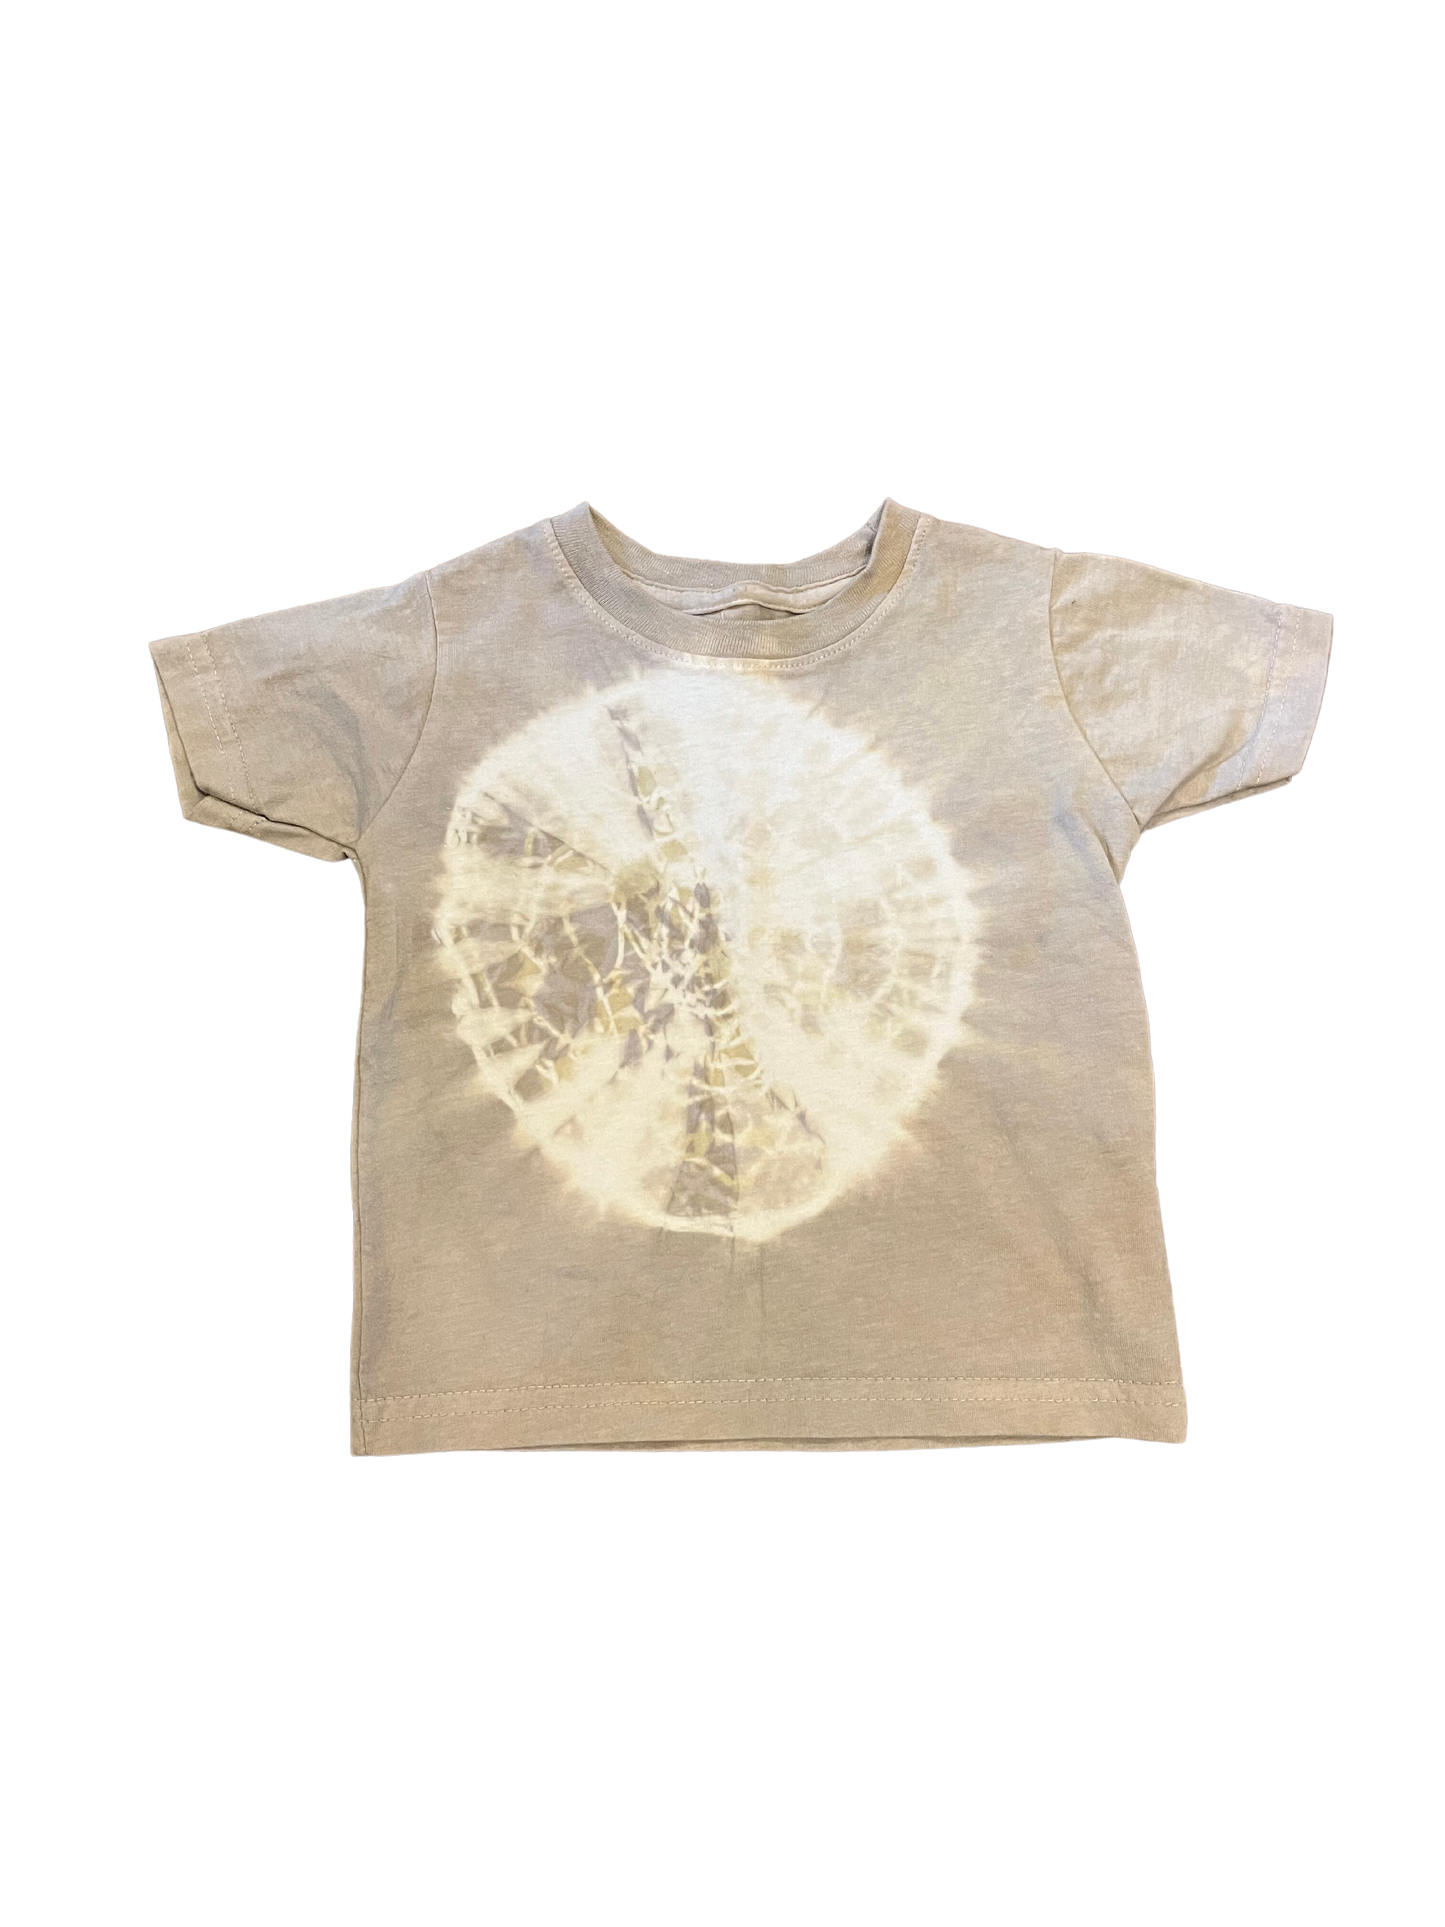 The Santa Cruz Tee for the Whole Family - Tie Dye Unisex Shirt by 1 Life